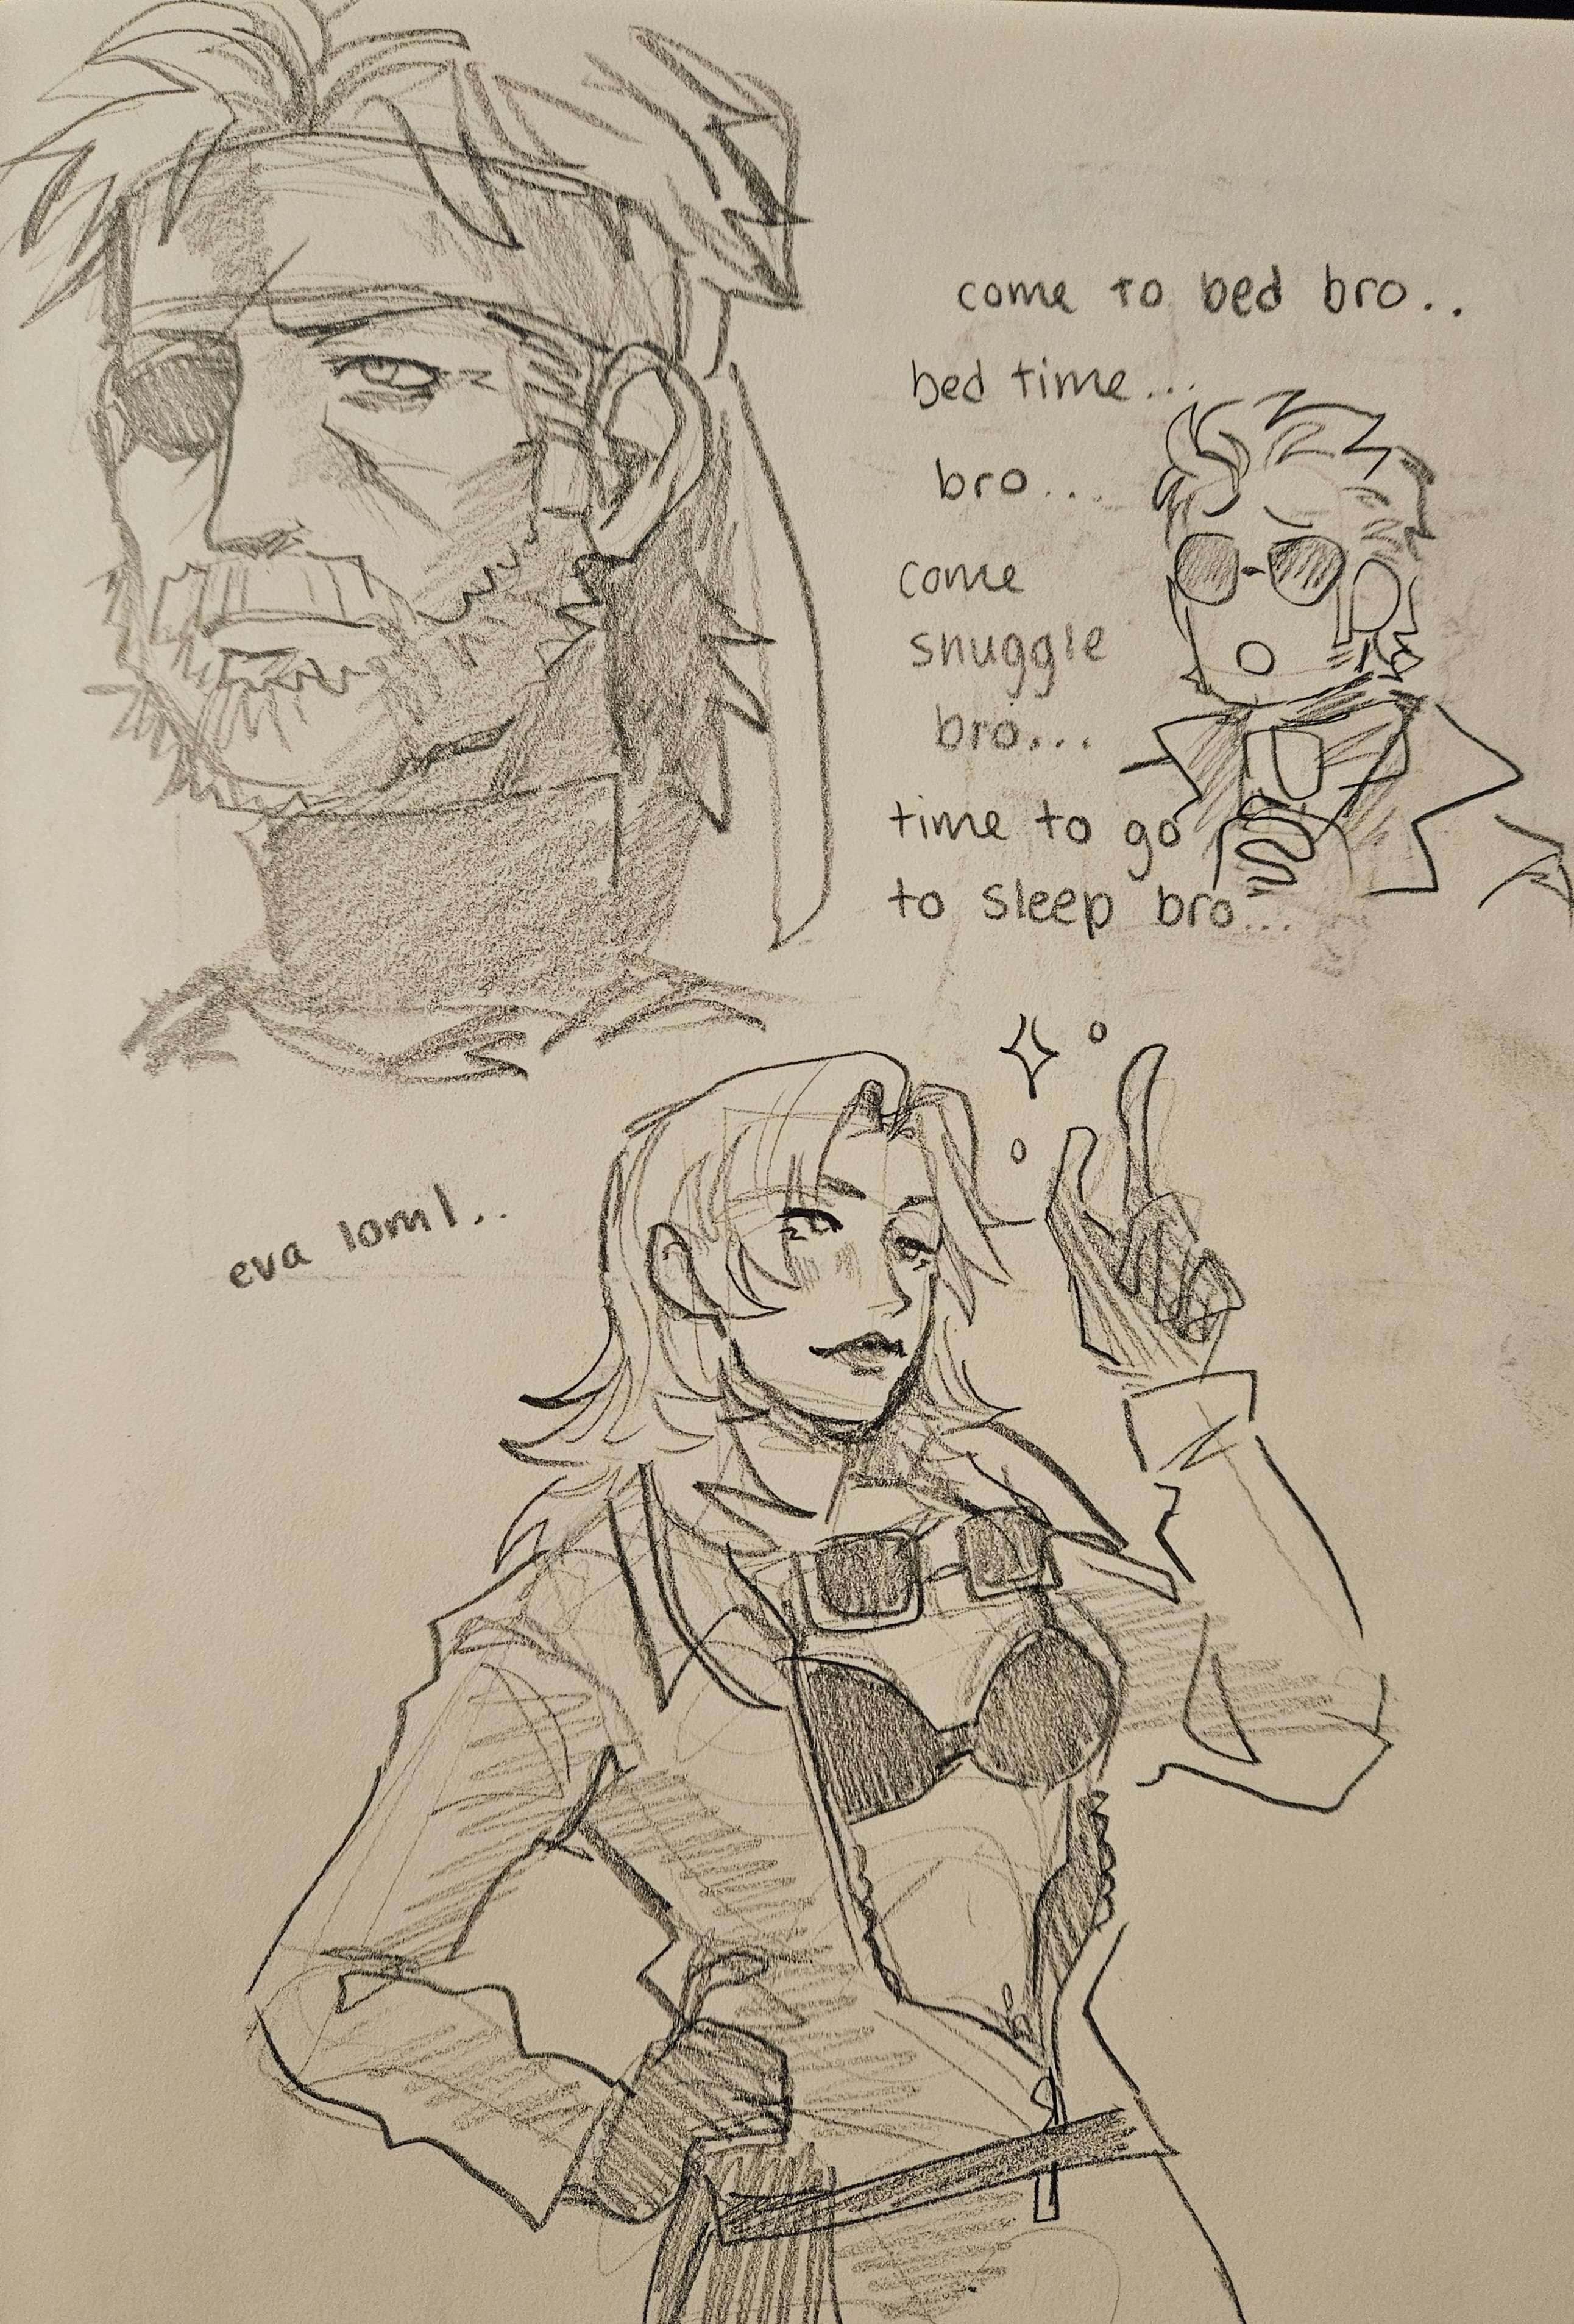 Sketchbook drawings of Big Boss, EVA and a teensy Kaz captioned 'come to bed bro... bed time... bro... come snuggle bro... time to go to sleep bro...'